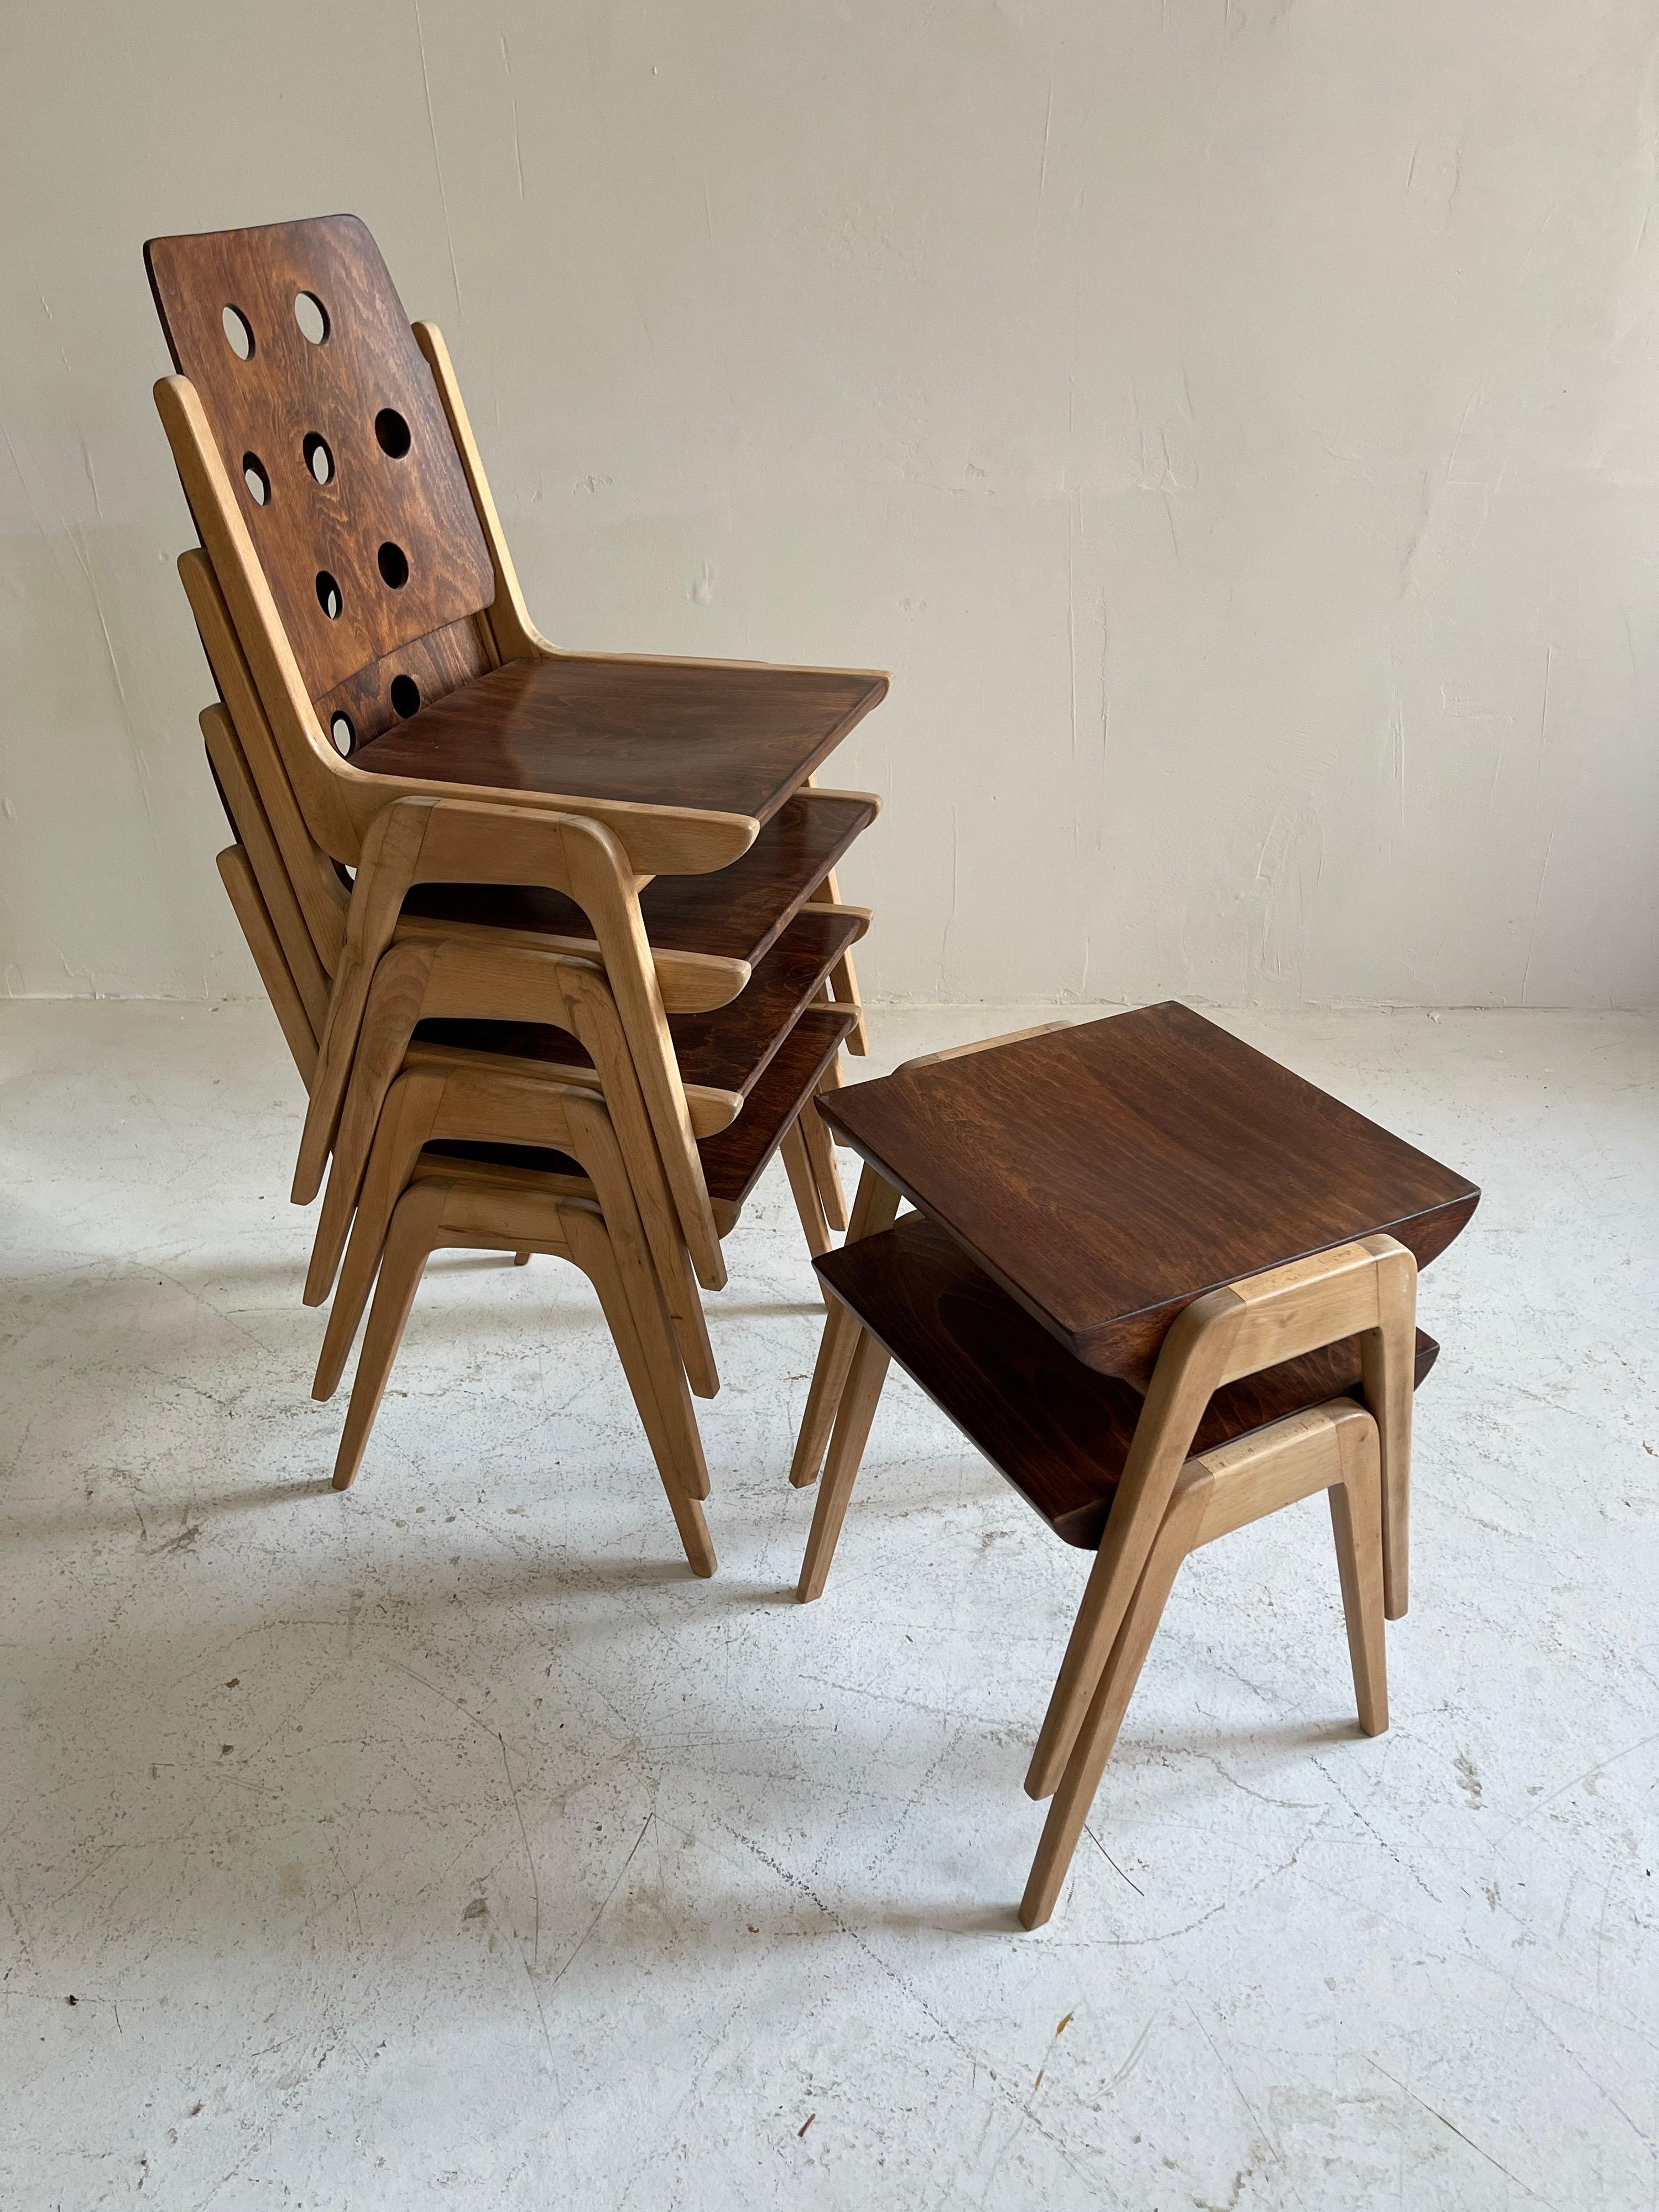 Franz Schuster Model 'Maestro' Dining Room Chairs & Stools, Austria, 1950s For Sale 5